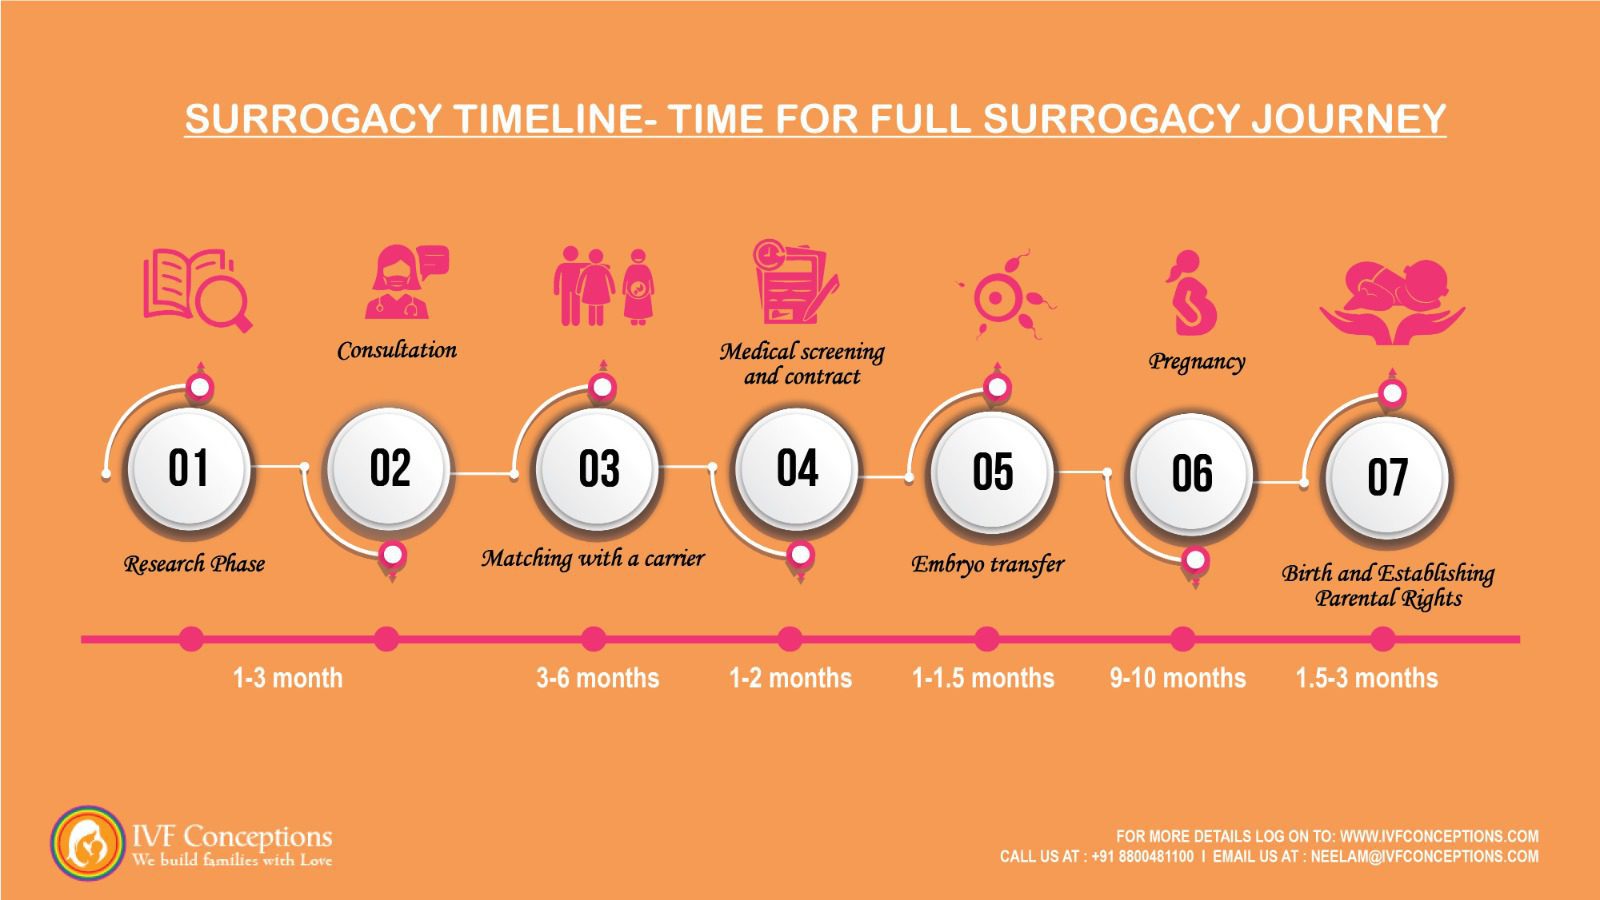 Surrogacy Timeline: How much time it takes for surogacy journey